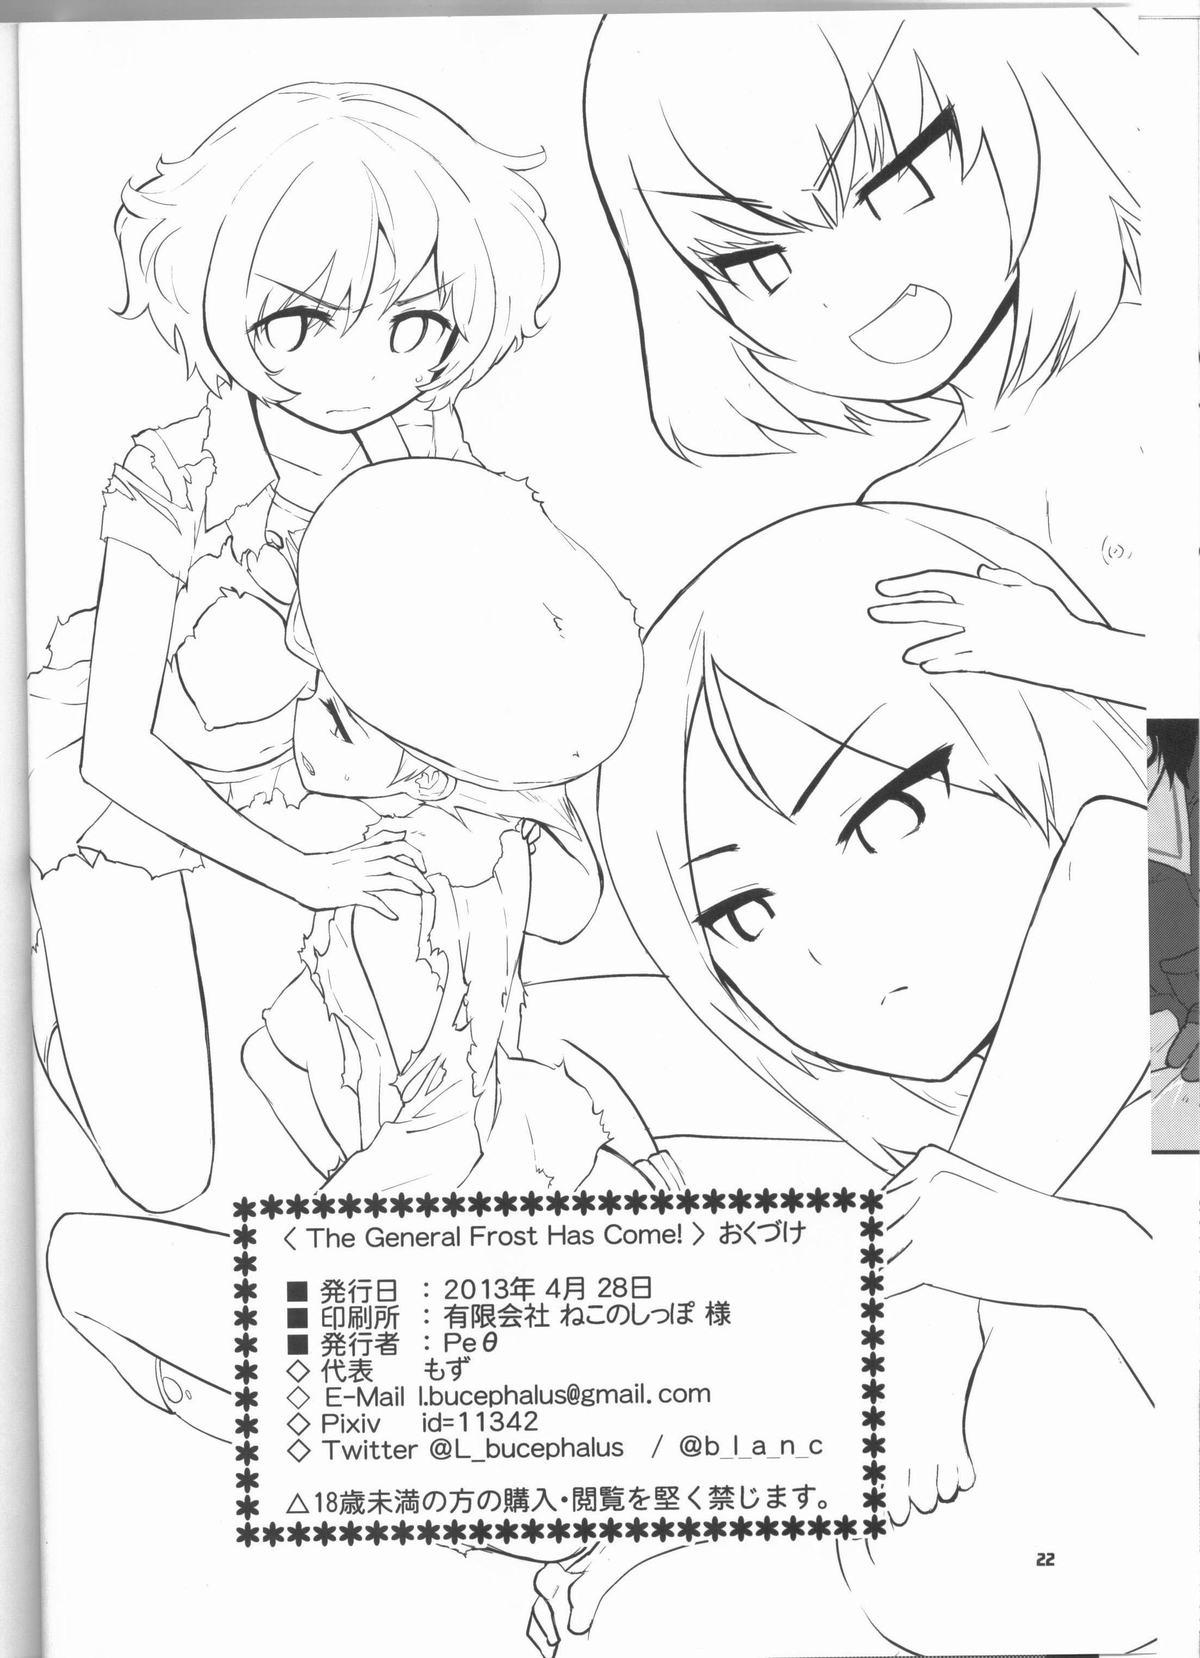 Anal The General Frost Has Come! - Girls und panzer Amateur Blowjob - Page 21